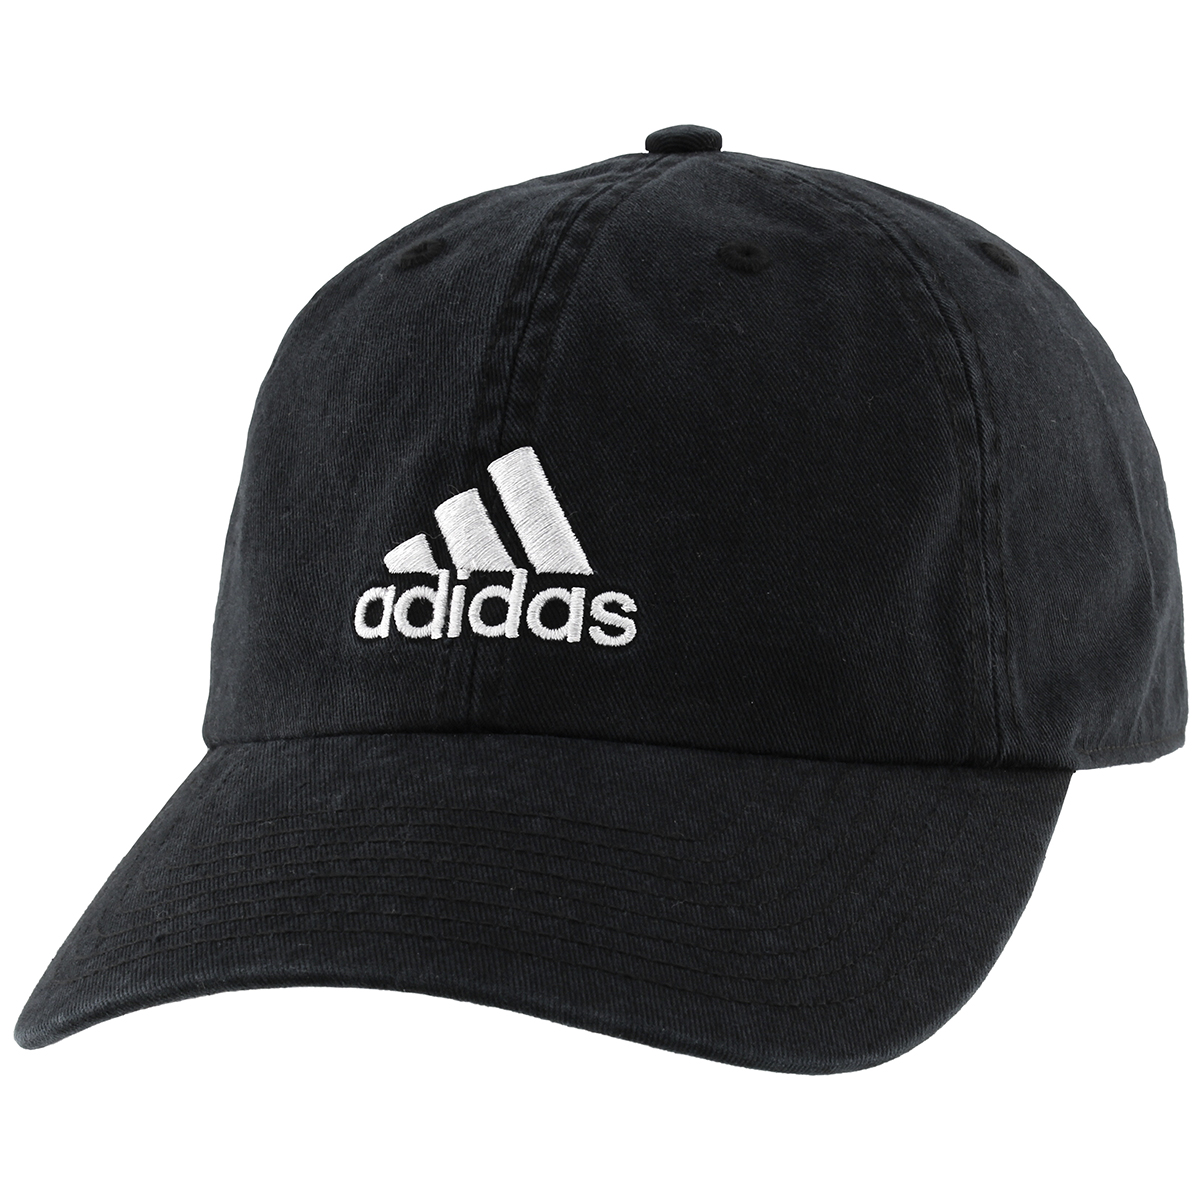 Adidas Men's Ultimate Relaxed Cap